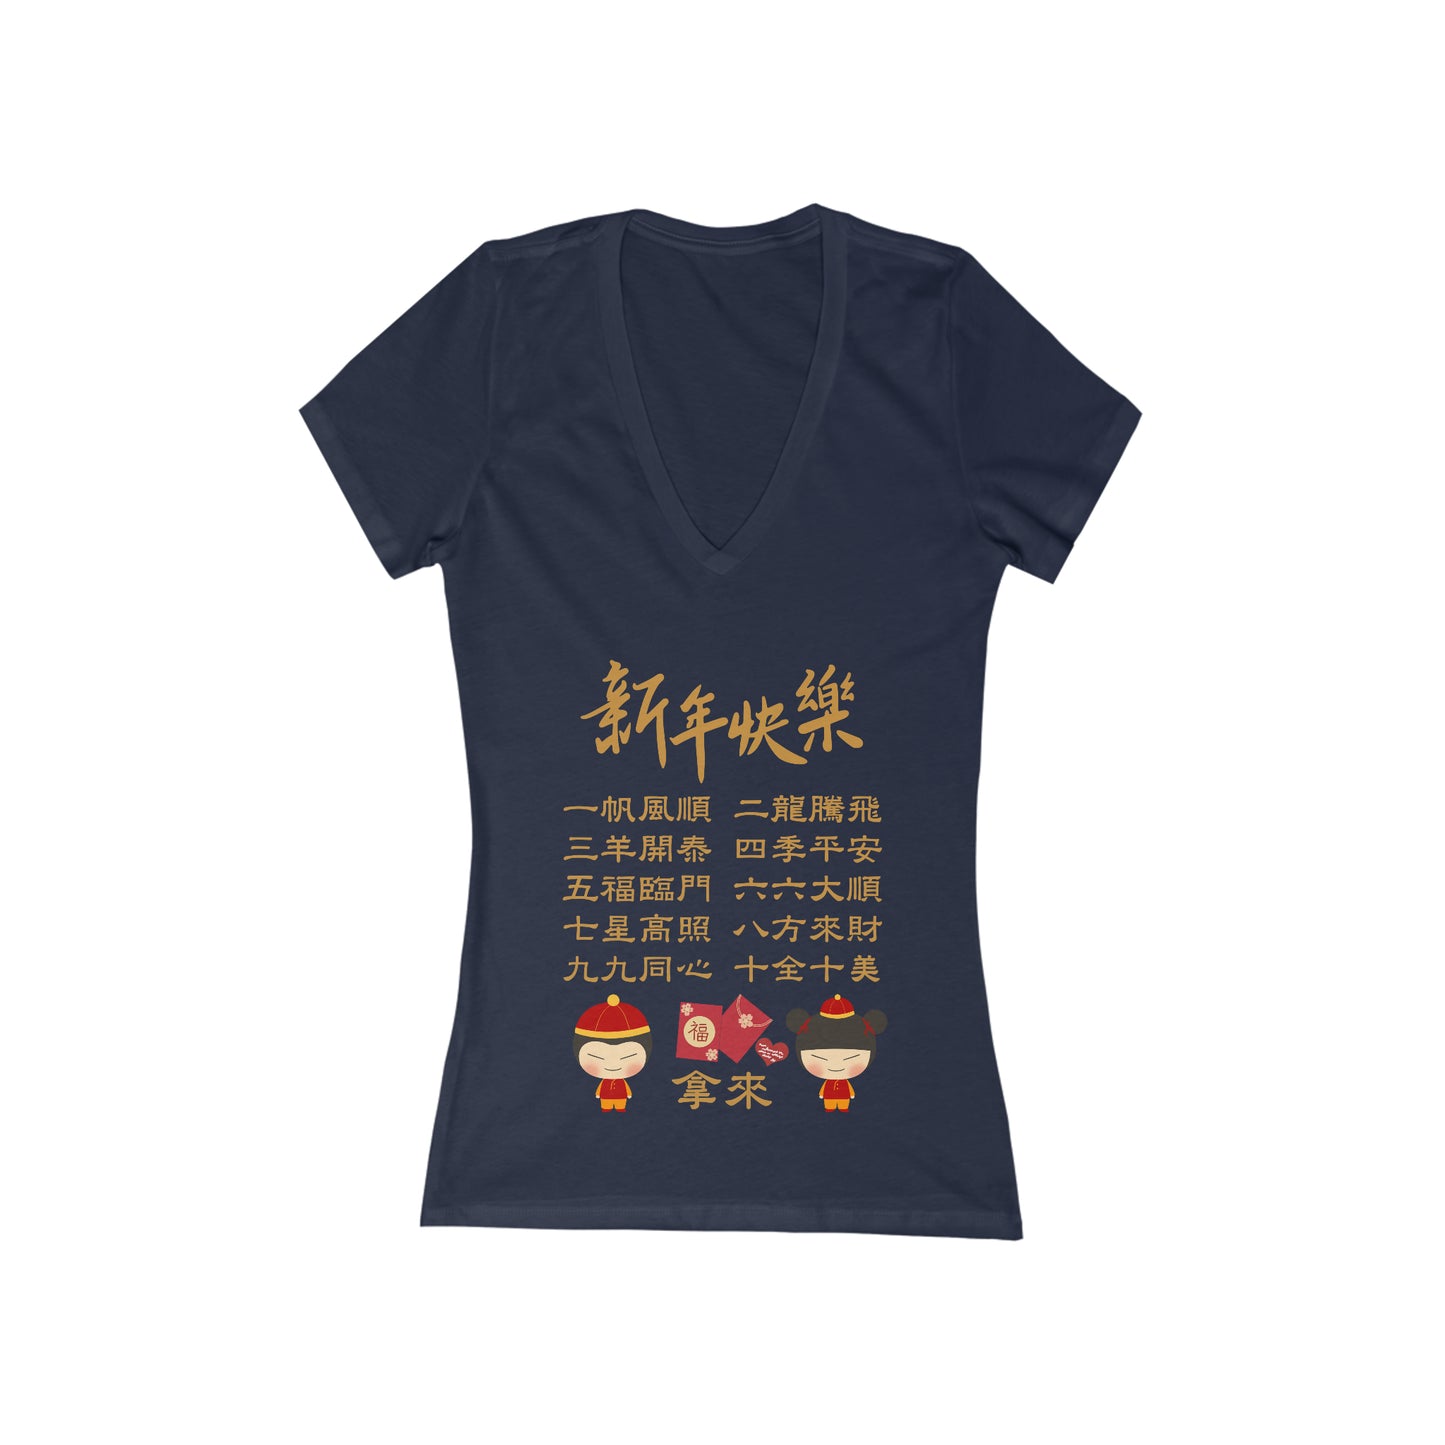 Women's Happy Chinese New Year 10 Idioms Red Envelope T-Shirt Deep V-Neck Tee